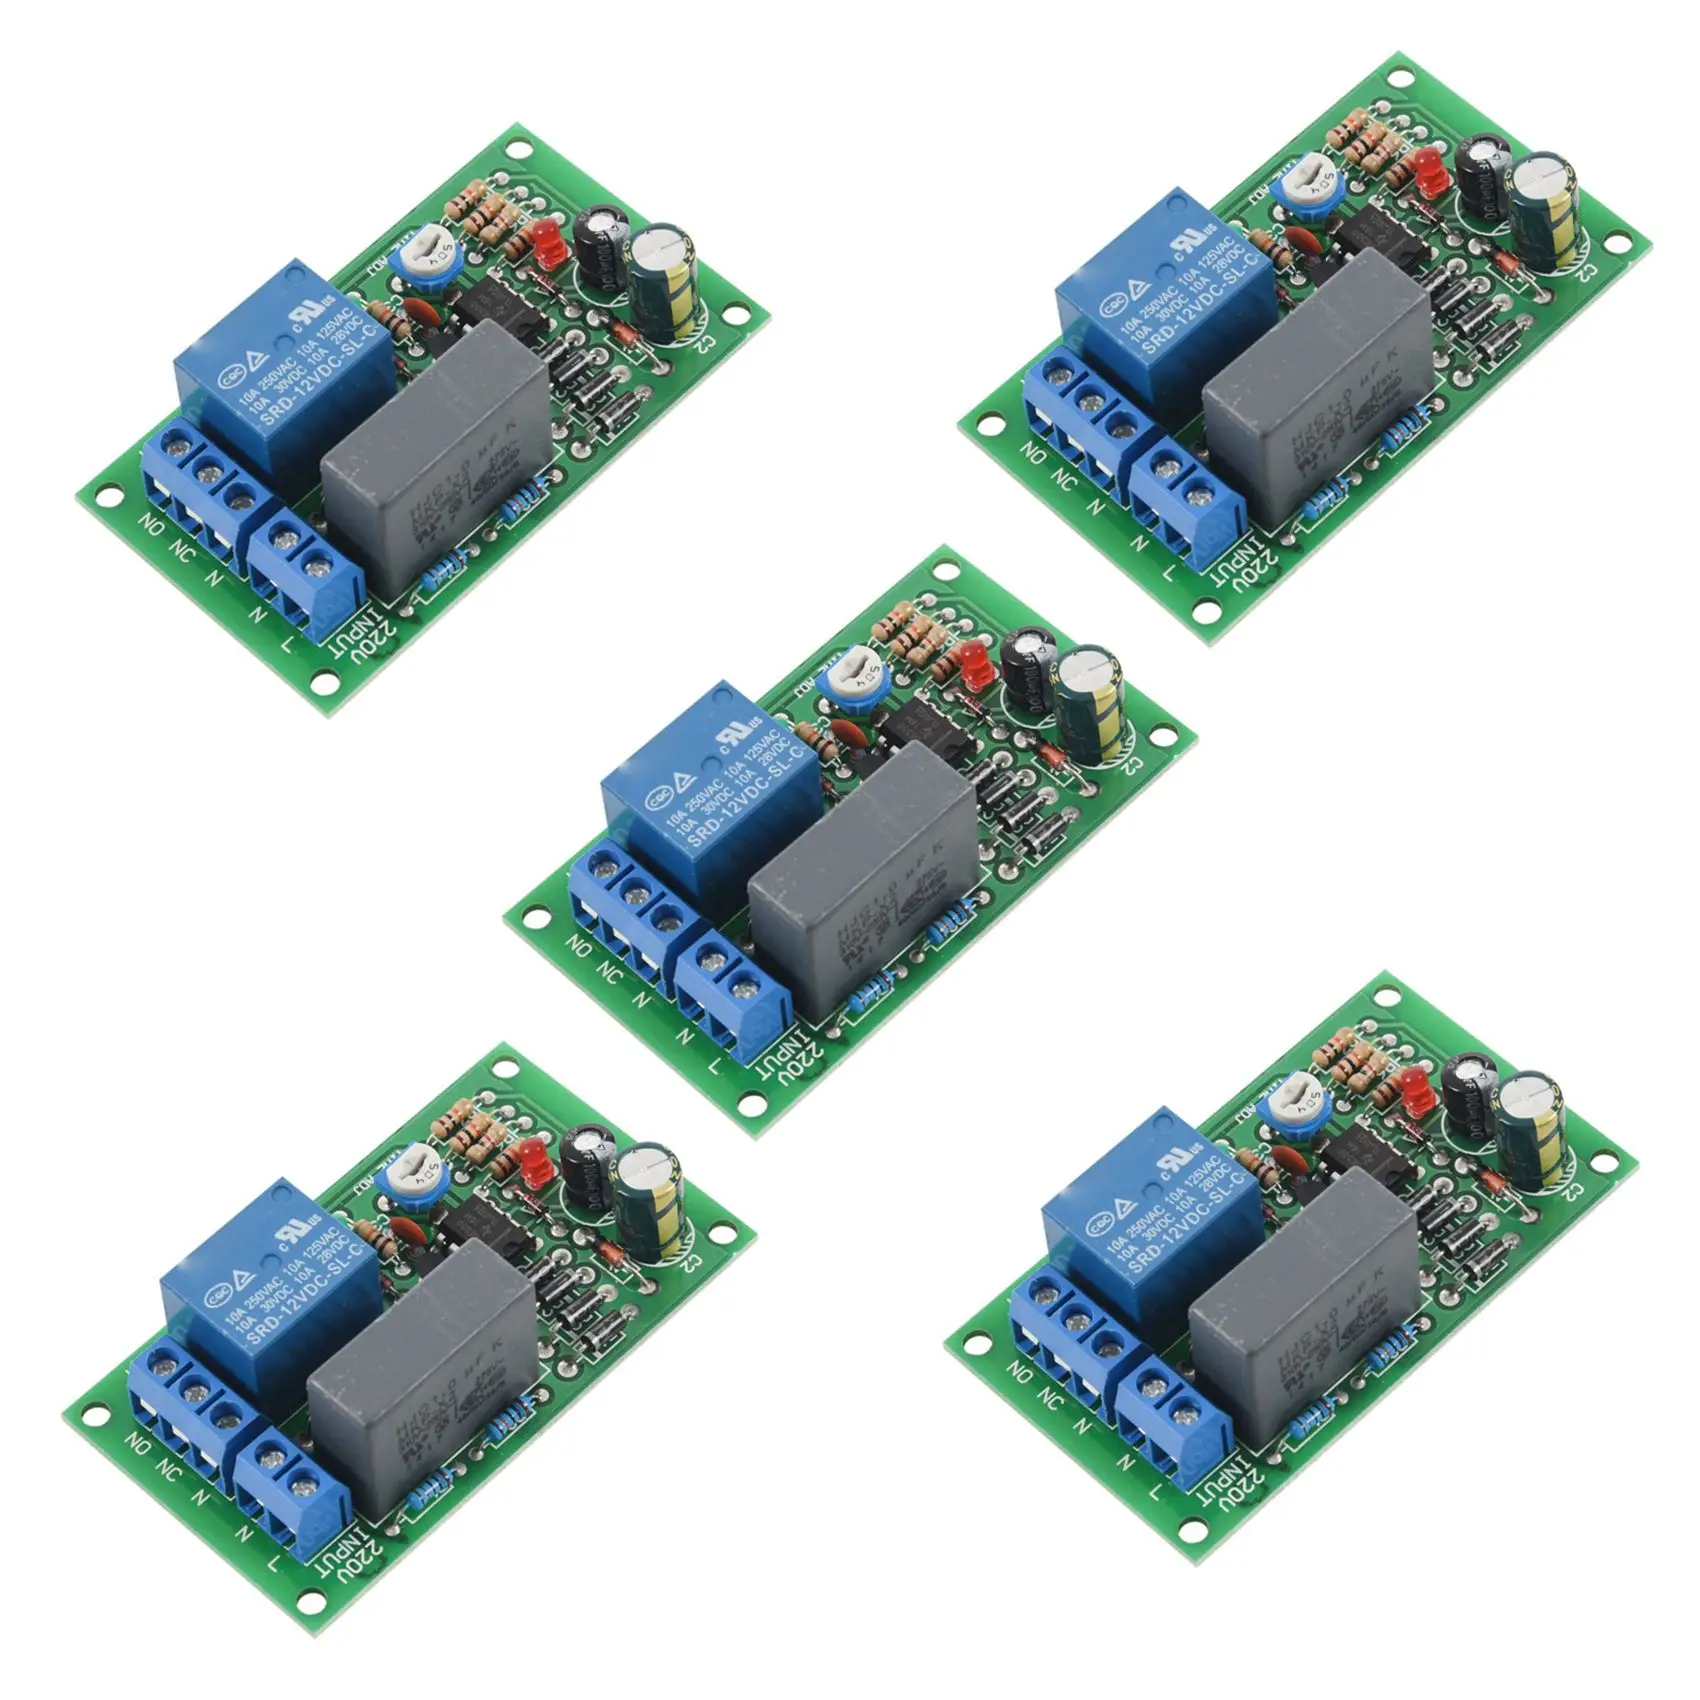 

5X 220V Relay Board, Power On, Time Delay, Circuit Module, Corridor Switch, Stair Light, D1B5